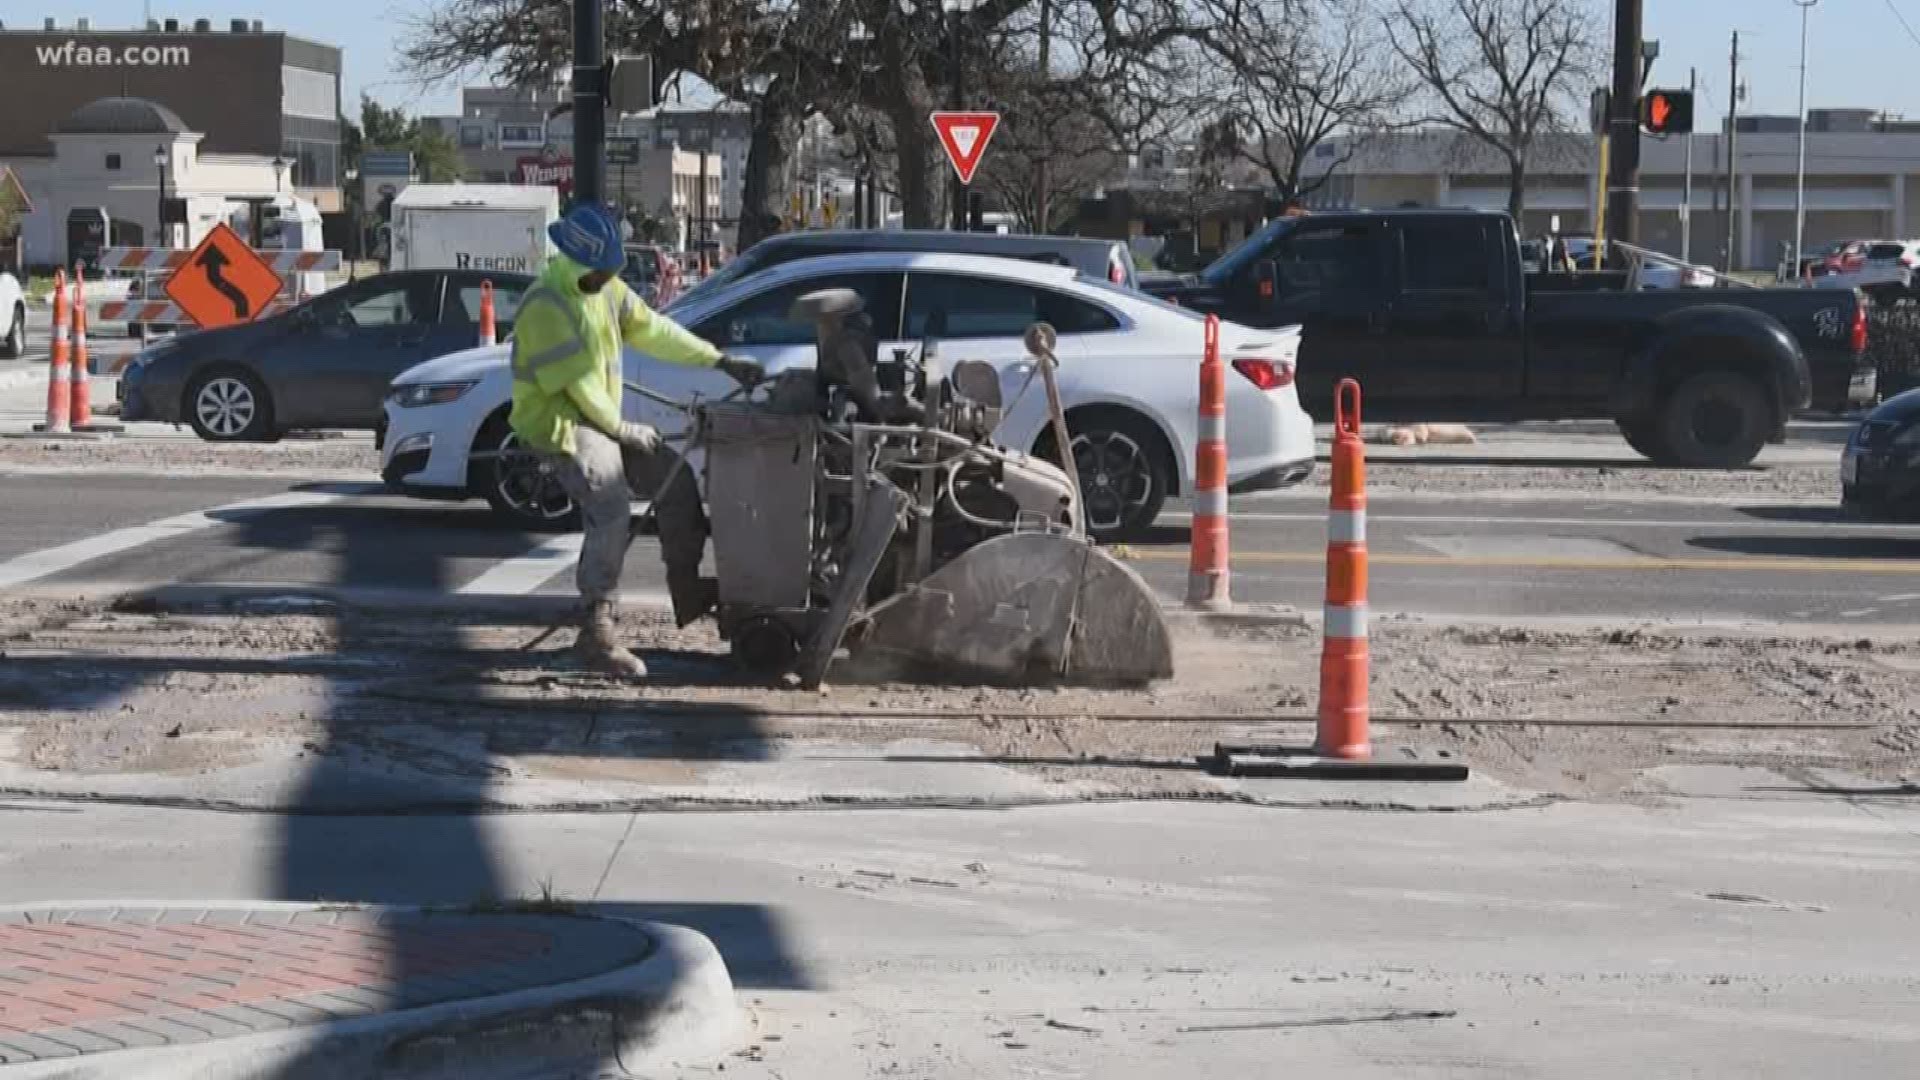 If you drive to work through Arlington you may have to adjust your schedule until the spring. Work crews are closing several lanes for the next three months.